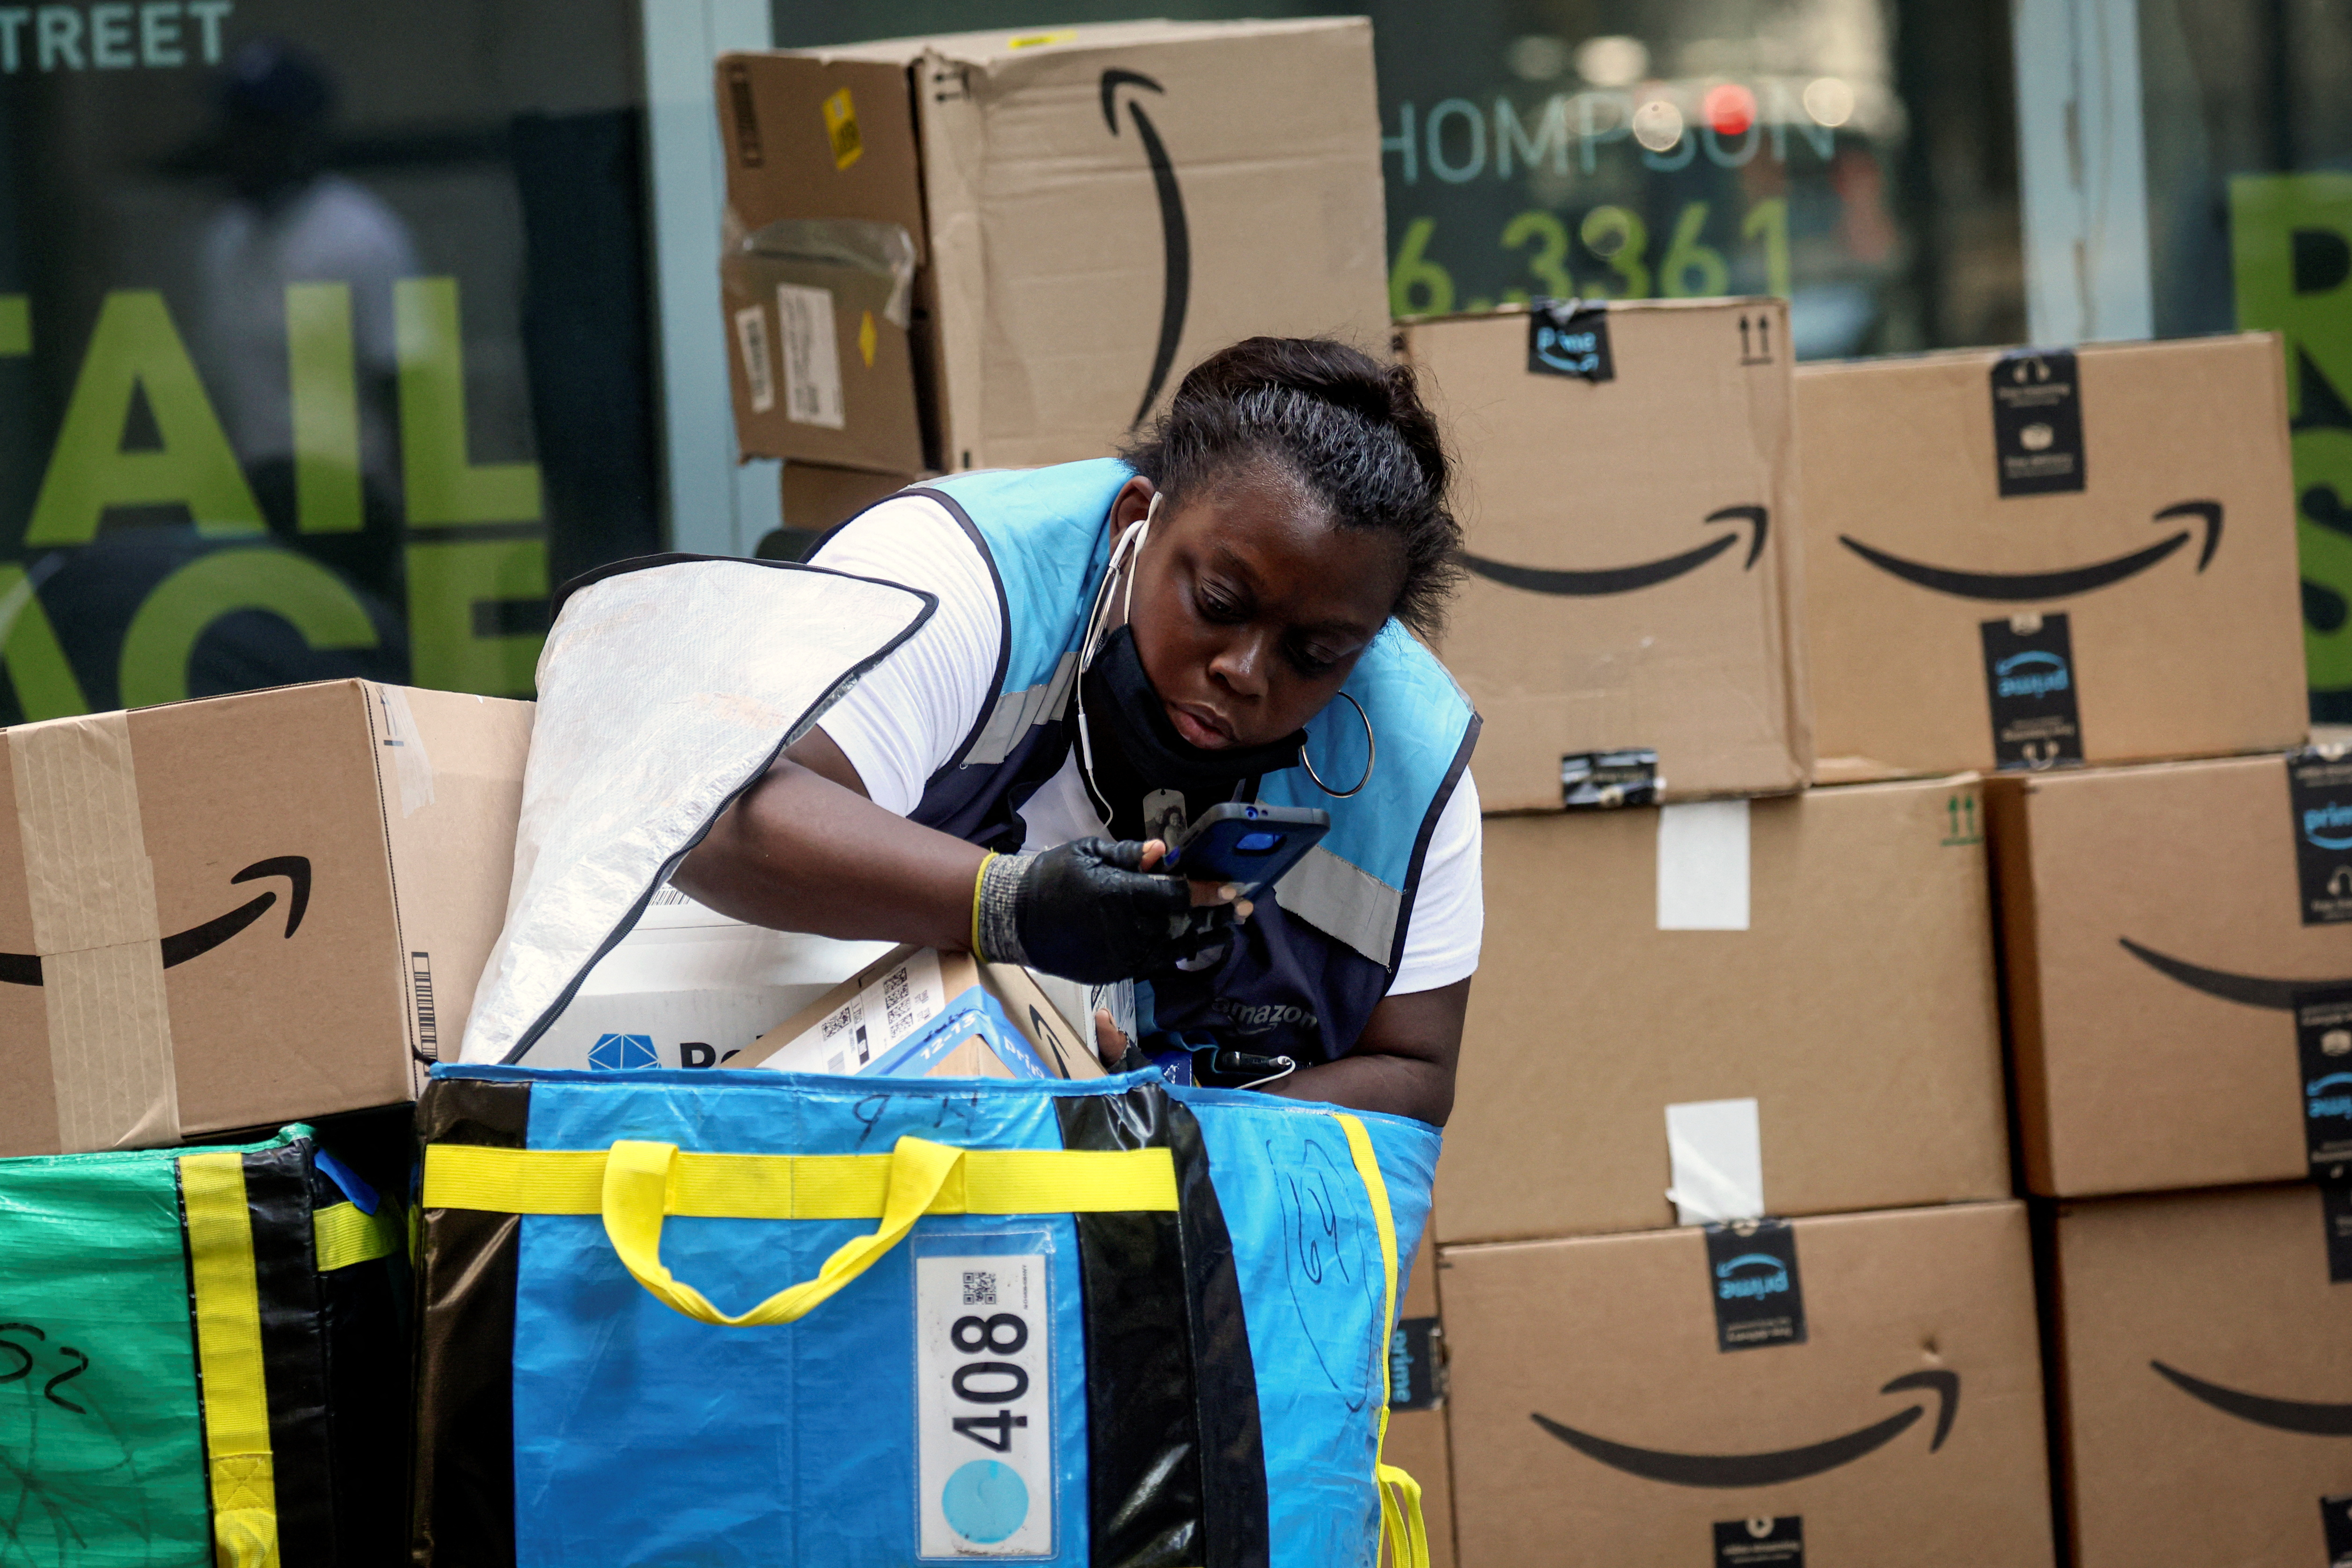 An Amazon delivery worker checks packages in New York